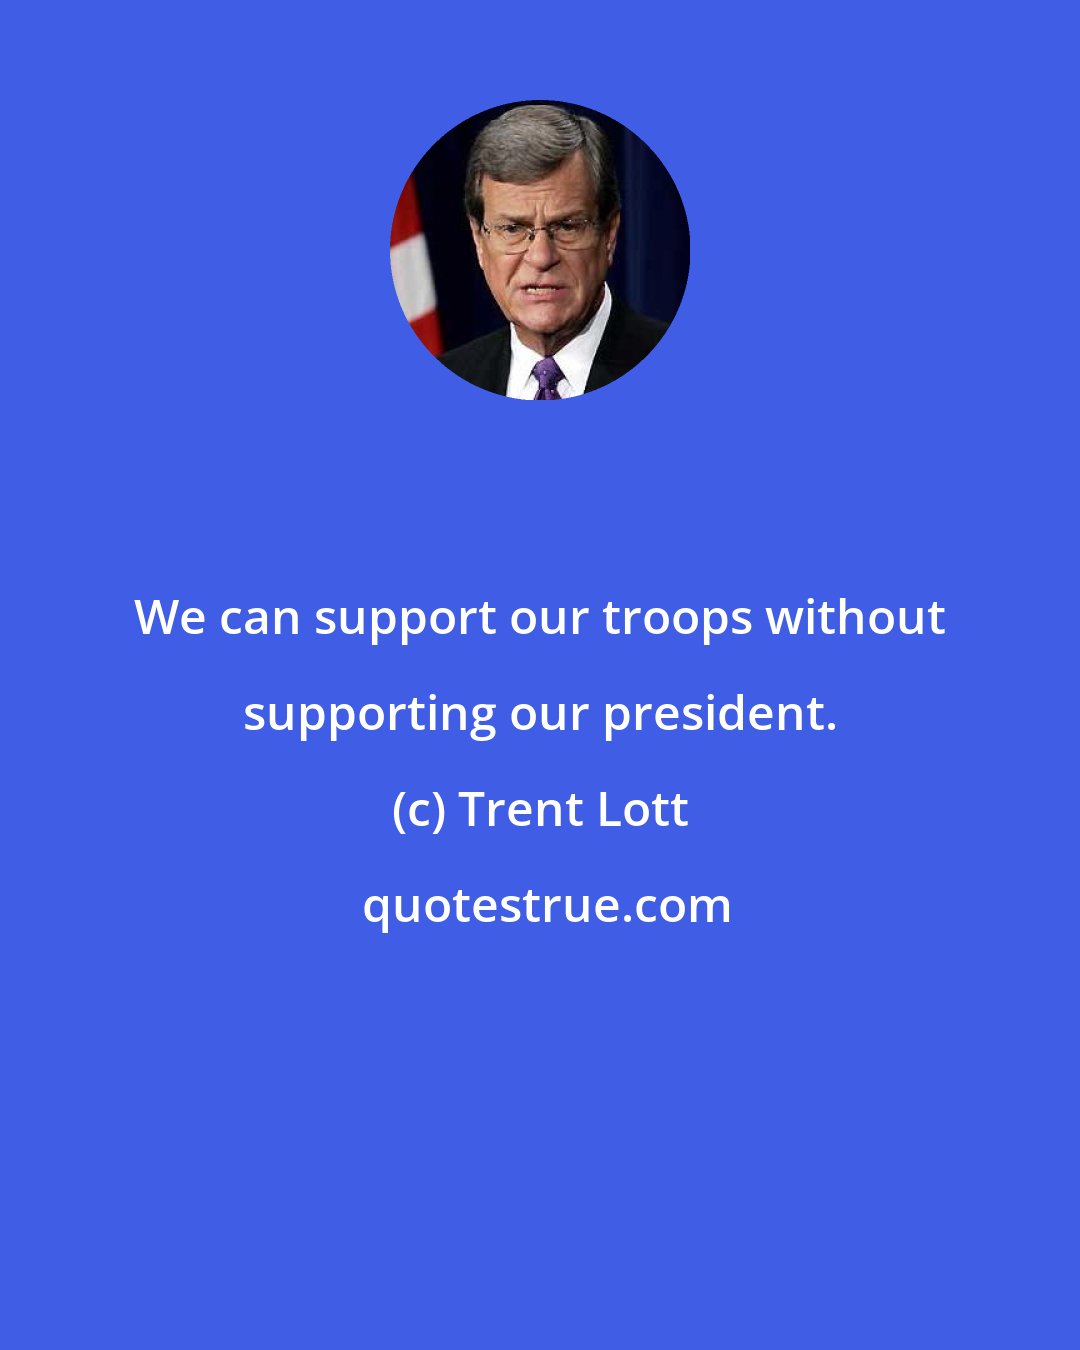 Trent Lott: We can support our troops without supporting our president.